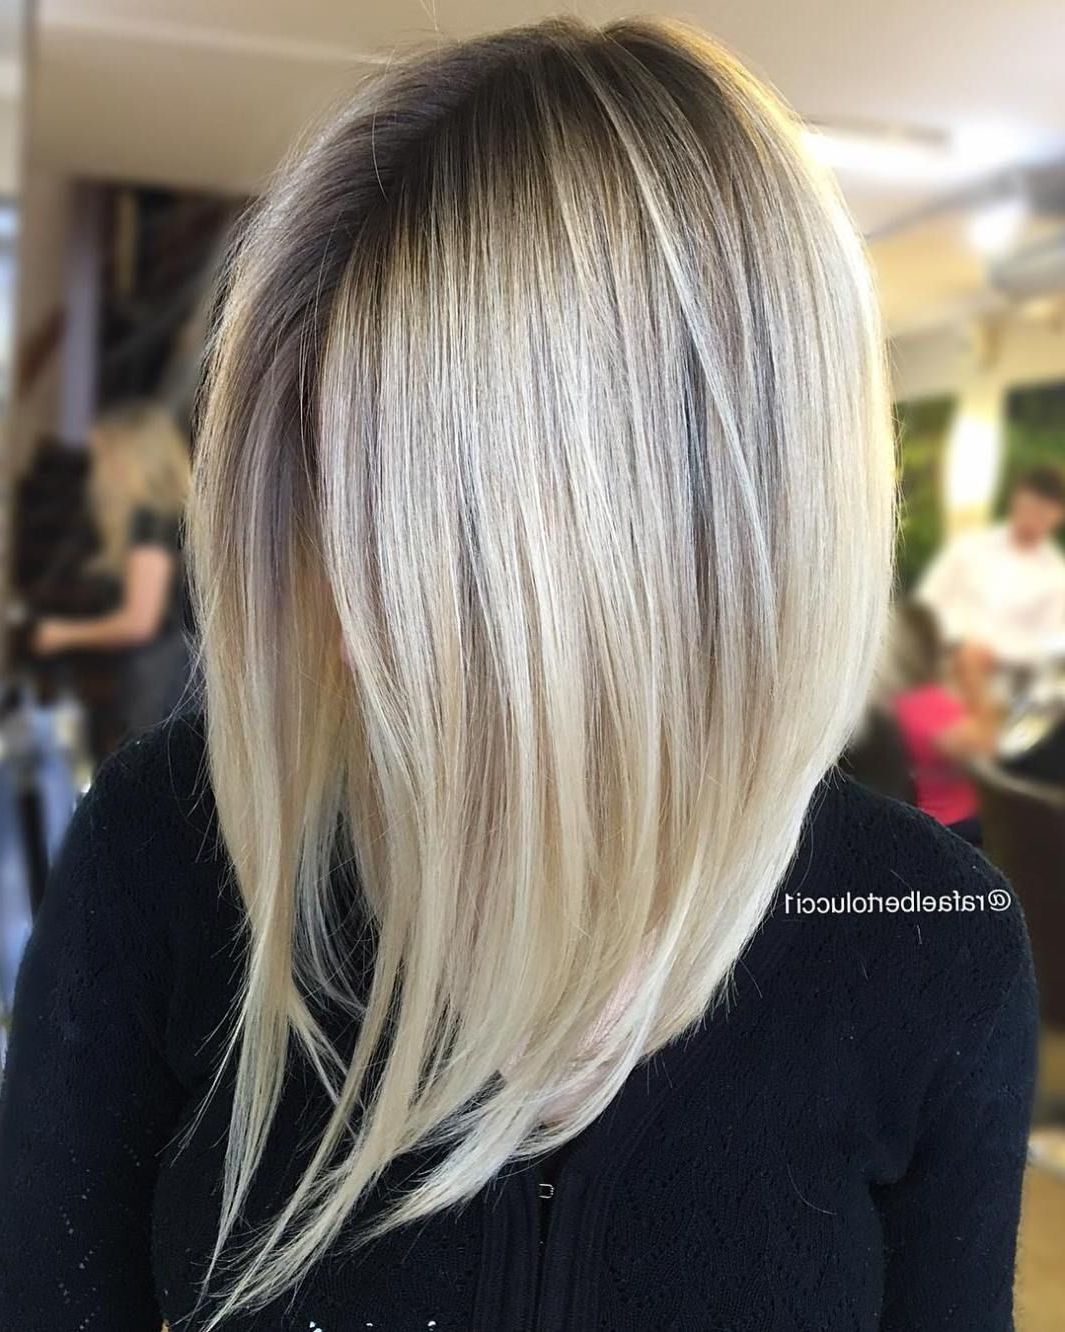 60 Inspiring Long Bob Hairstyles And Haircuts In 2018 | Great Hair Within Classy Slanted Blonde Bob Hairstyles (View 3 of 20)